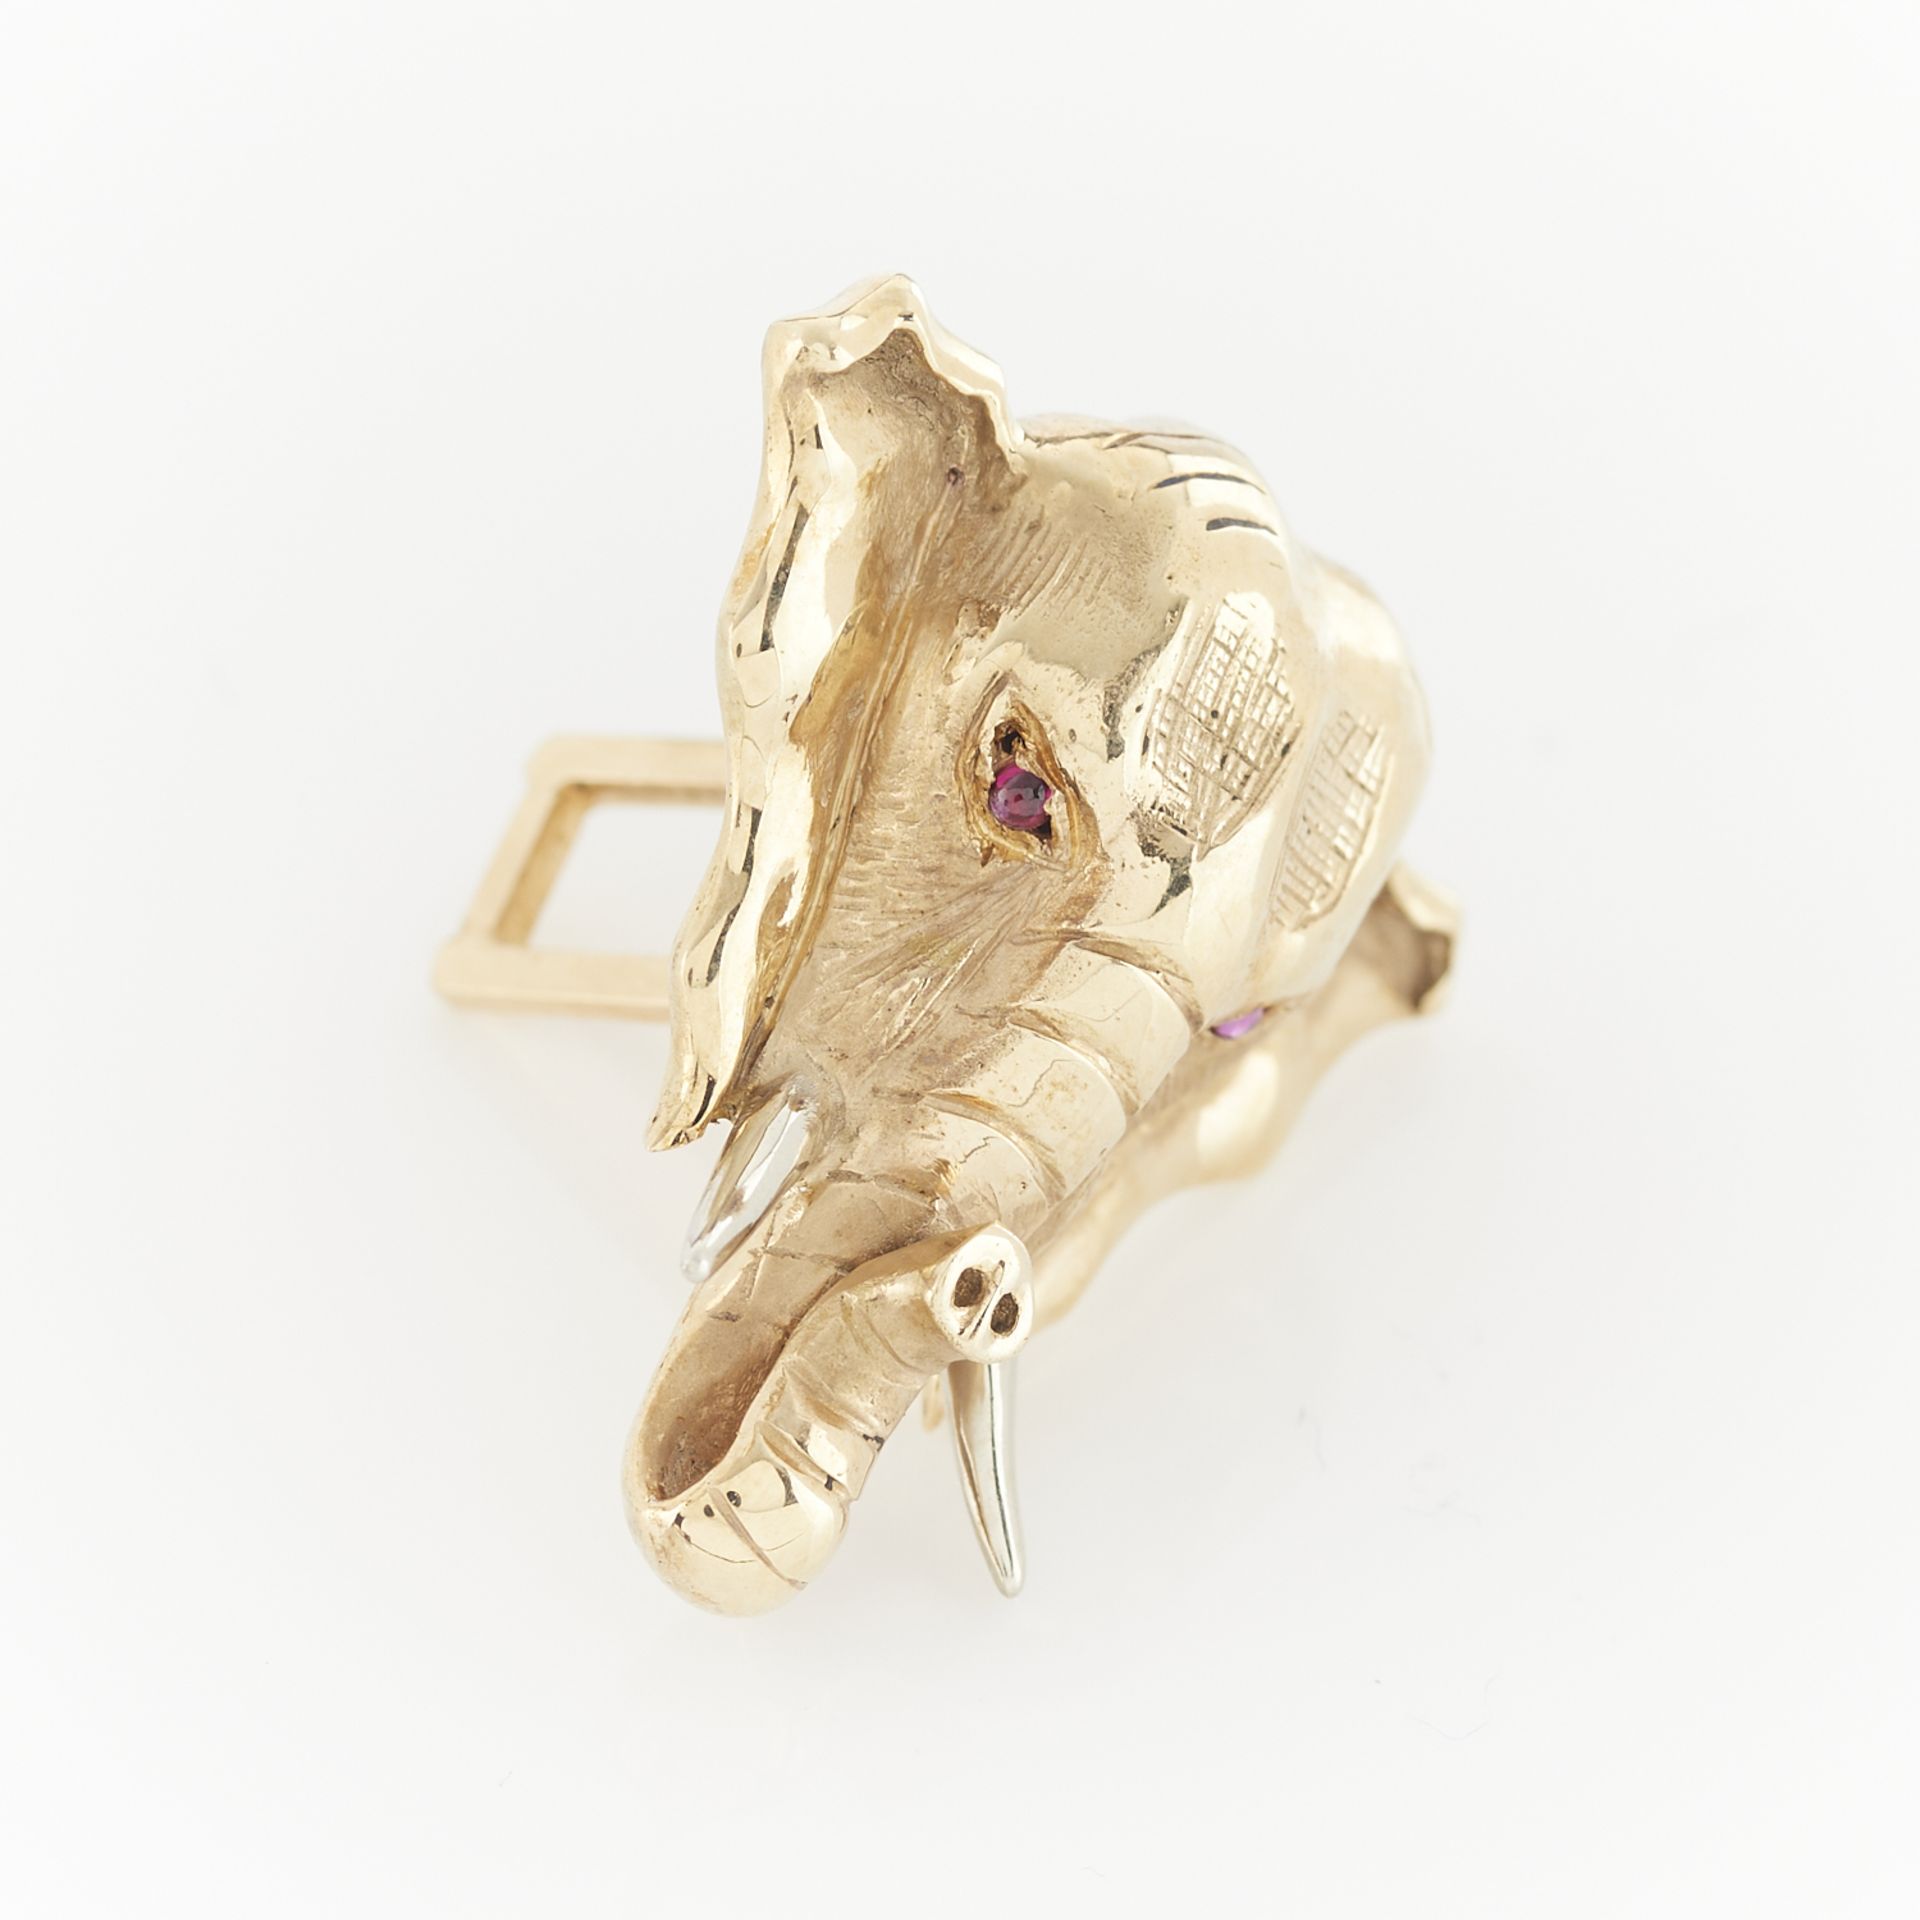 Pair of 14k Elephant Cuff Links - Image 6 of 9